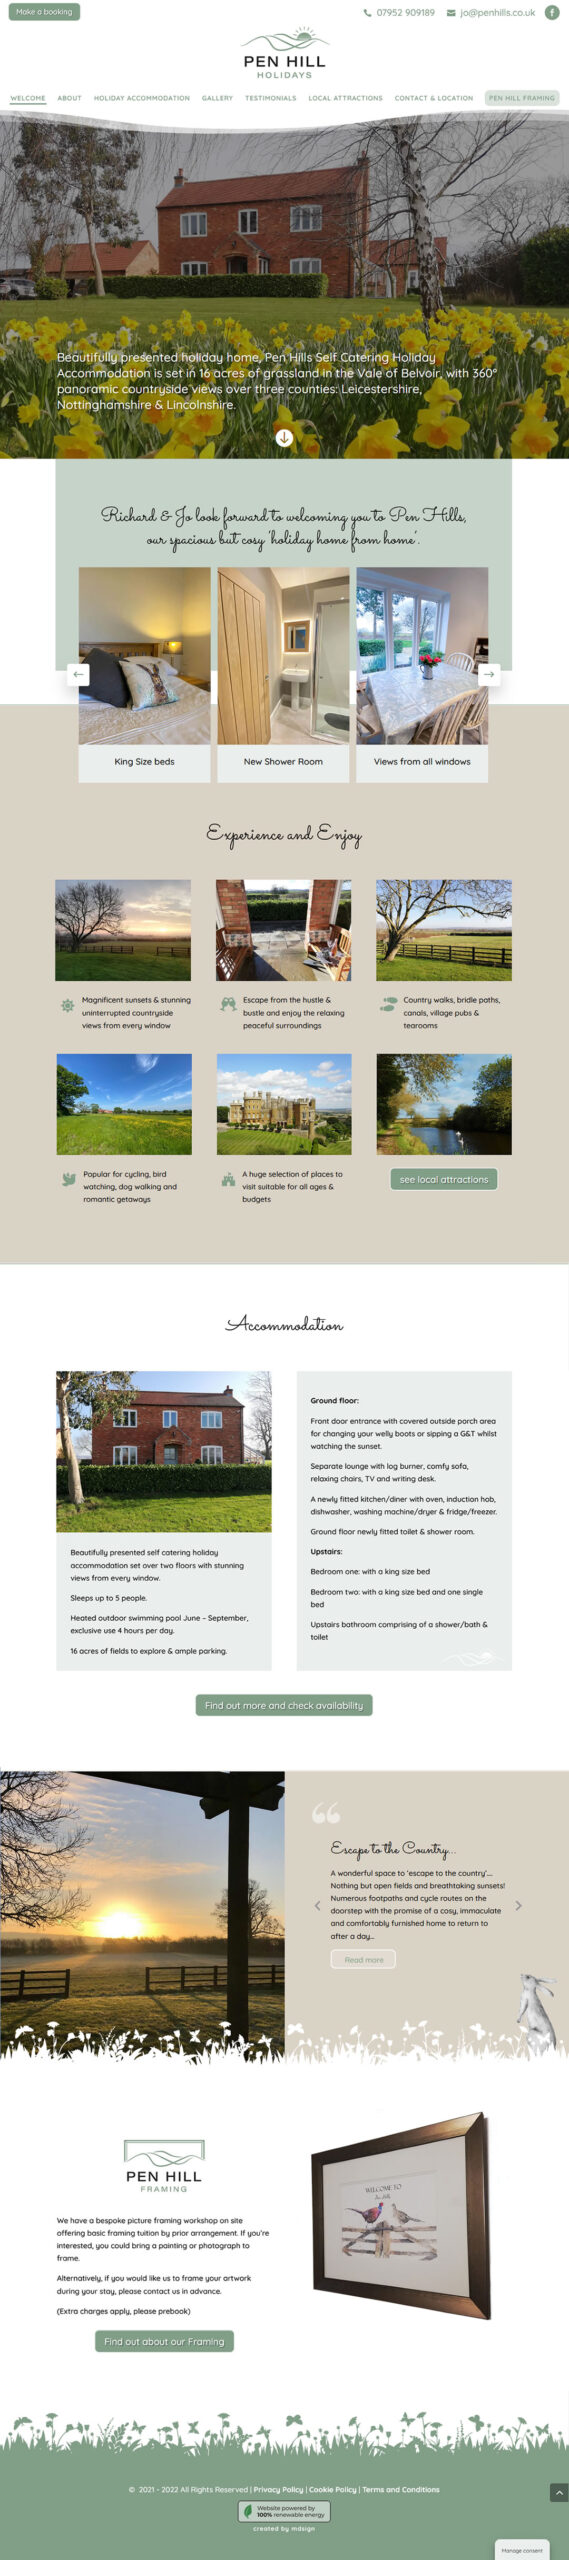 Pen Hill Holidays and Framing website design by Mdsign